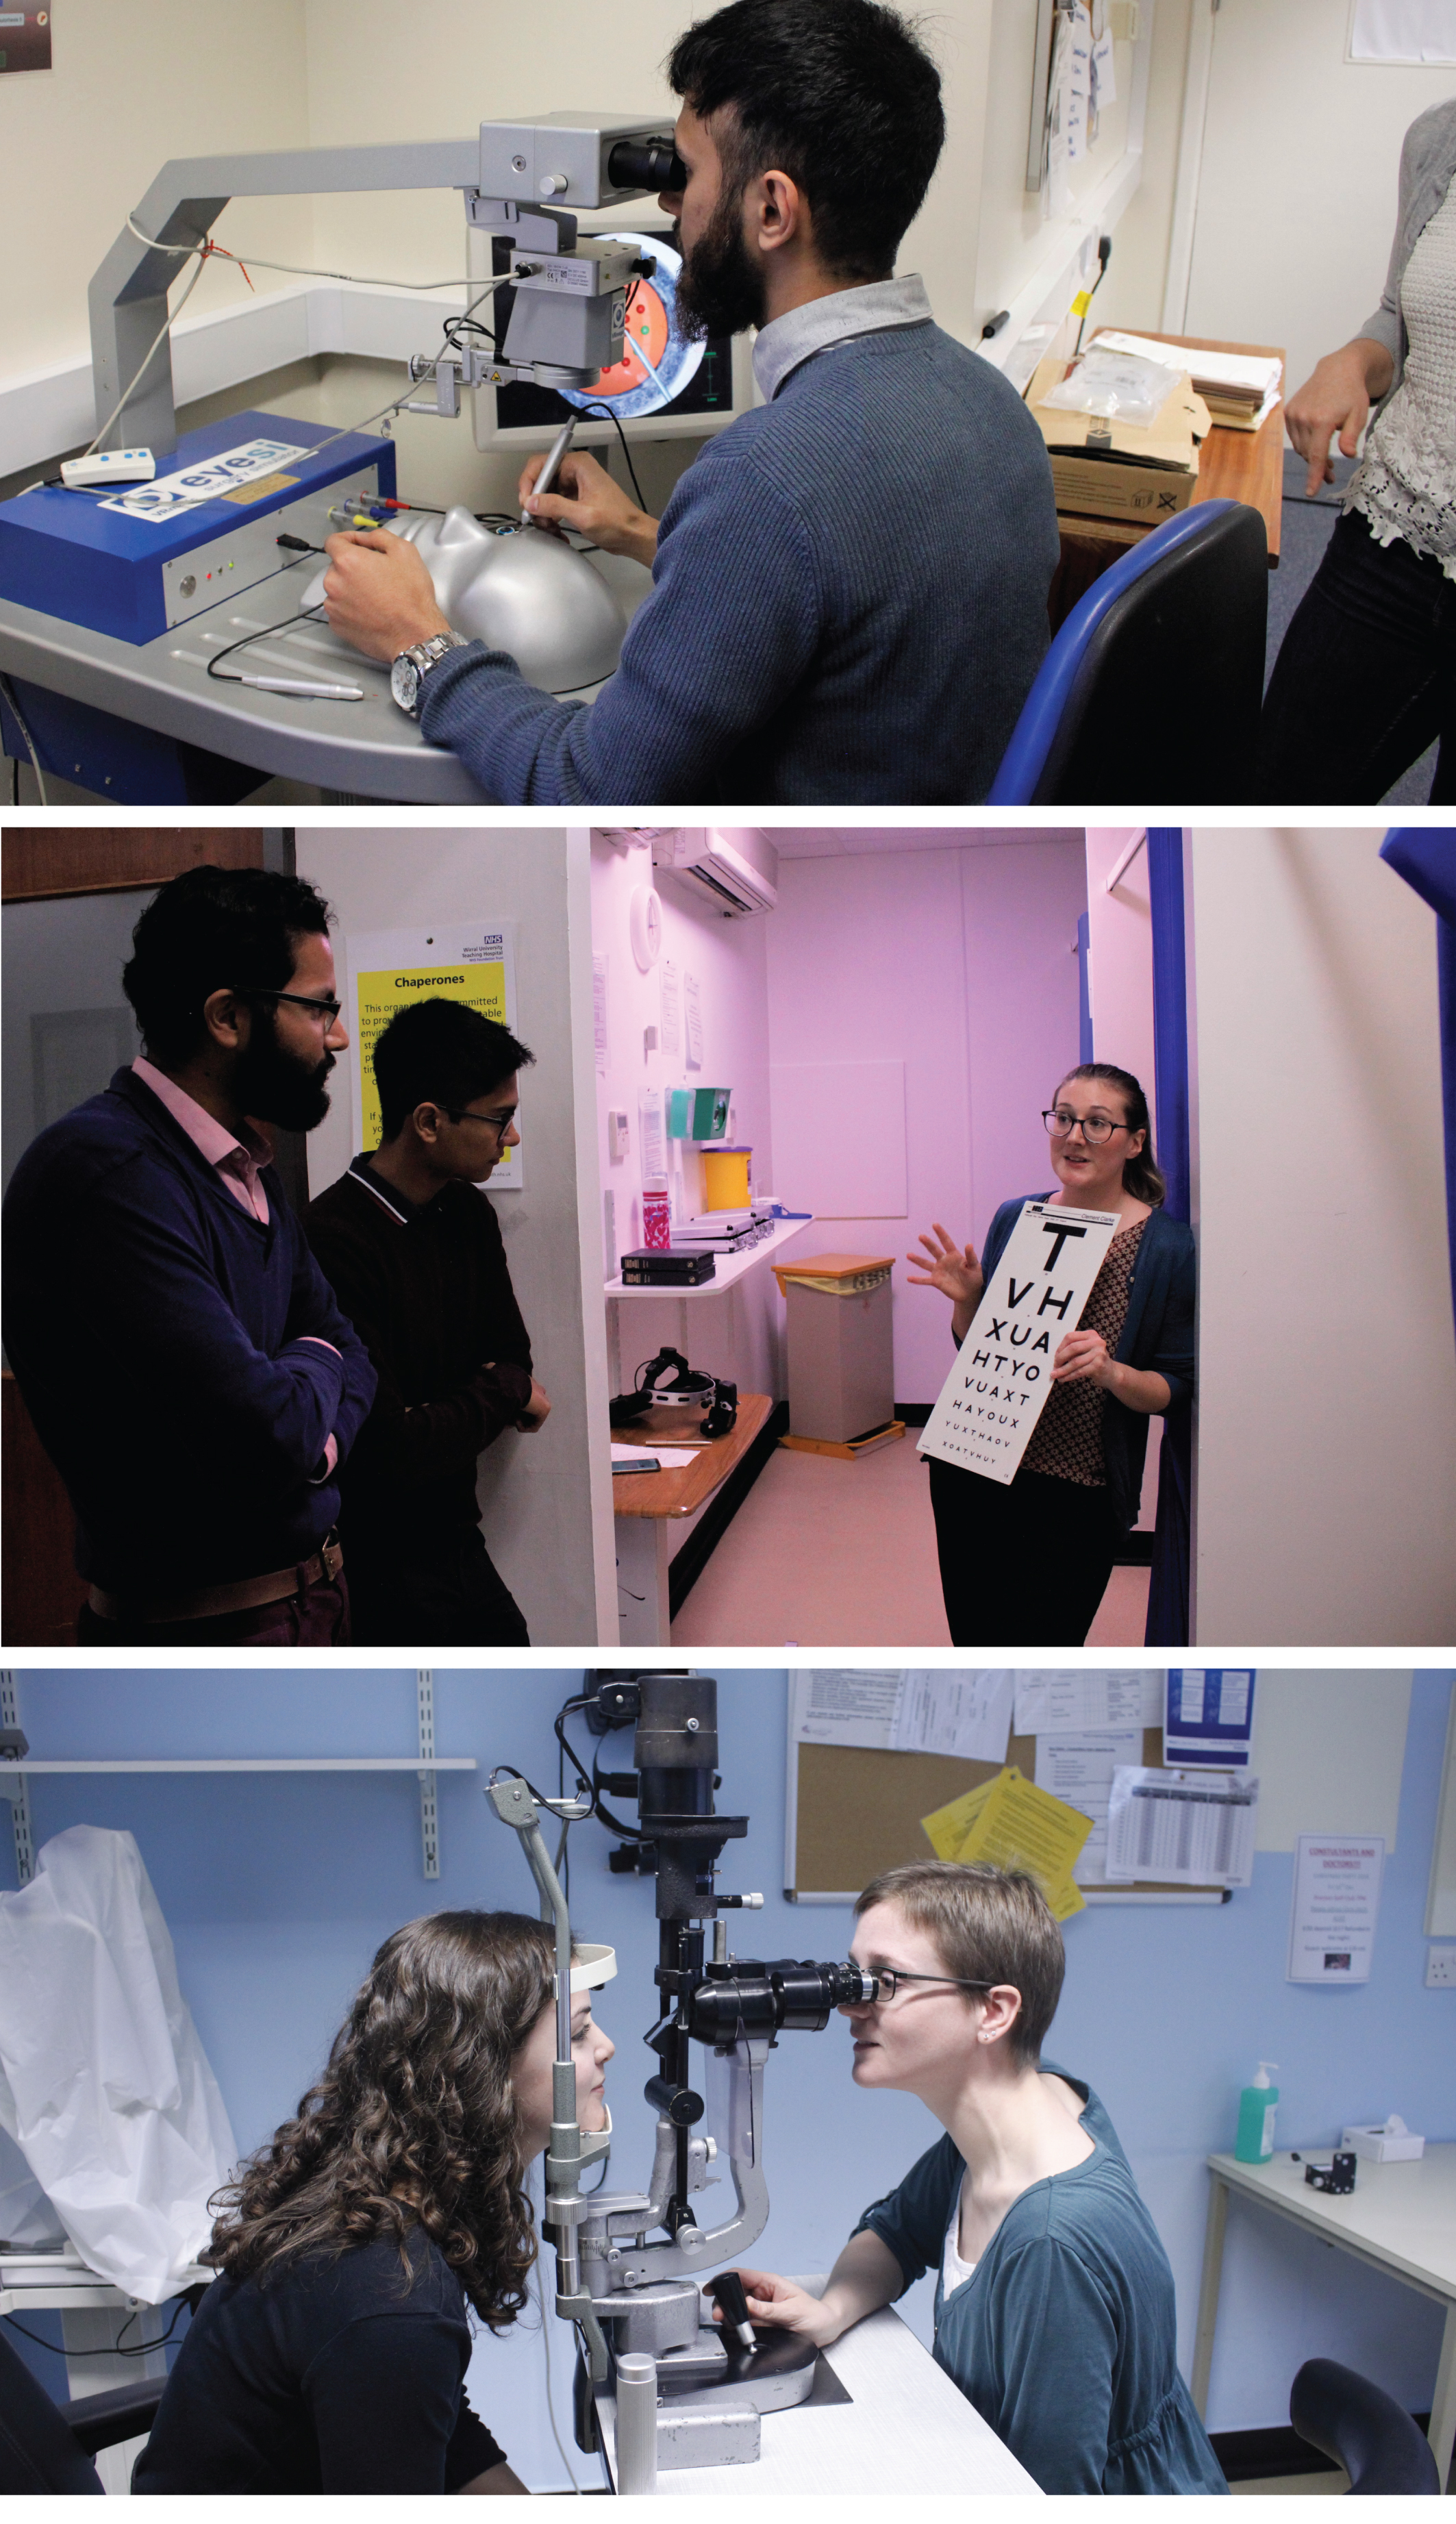 Ophthalmology taster day